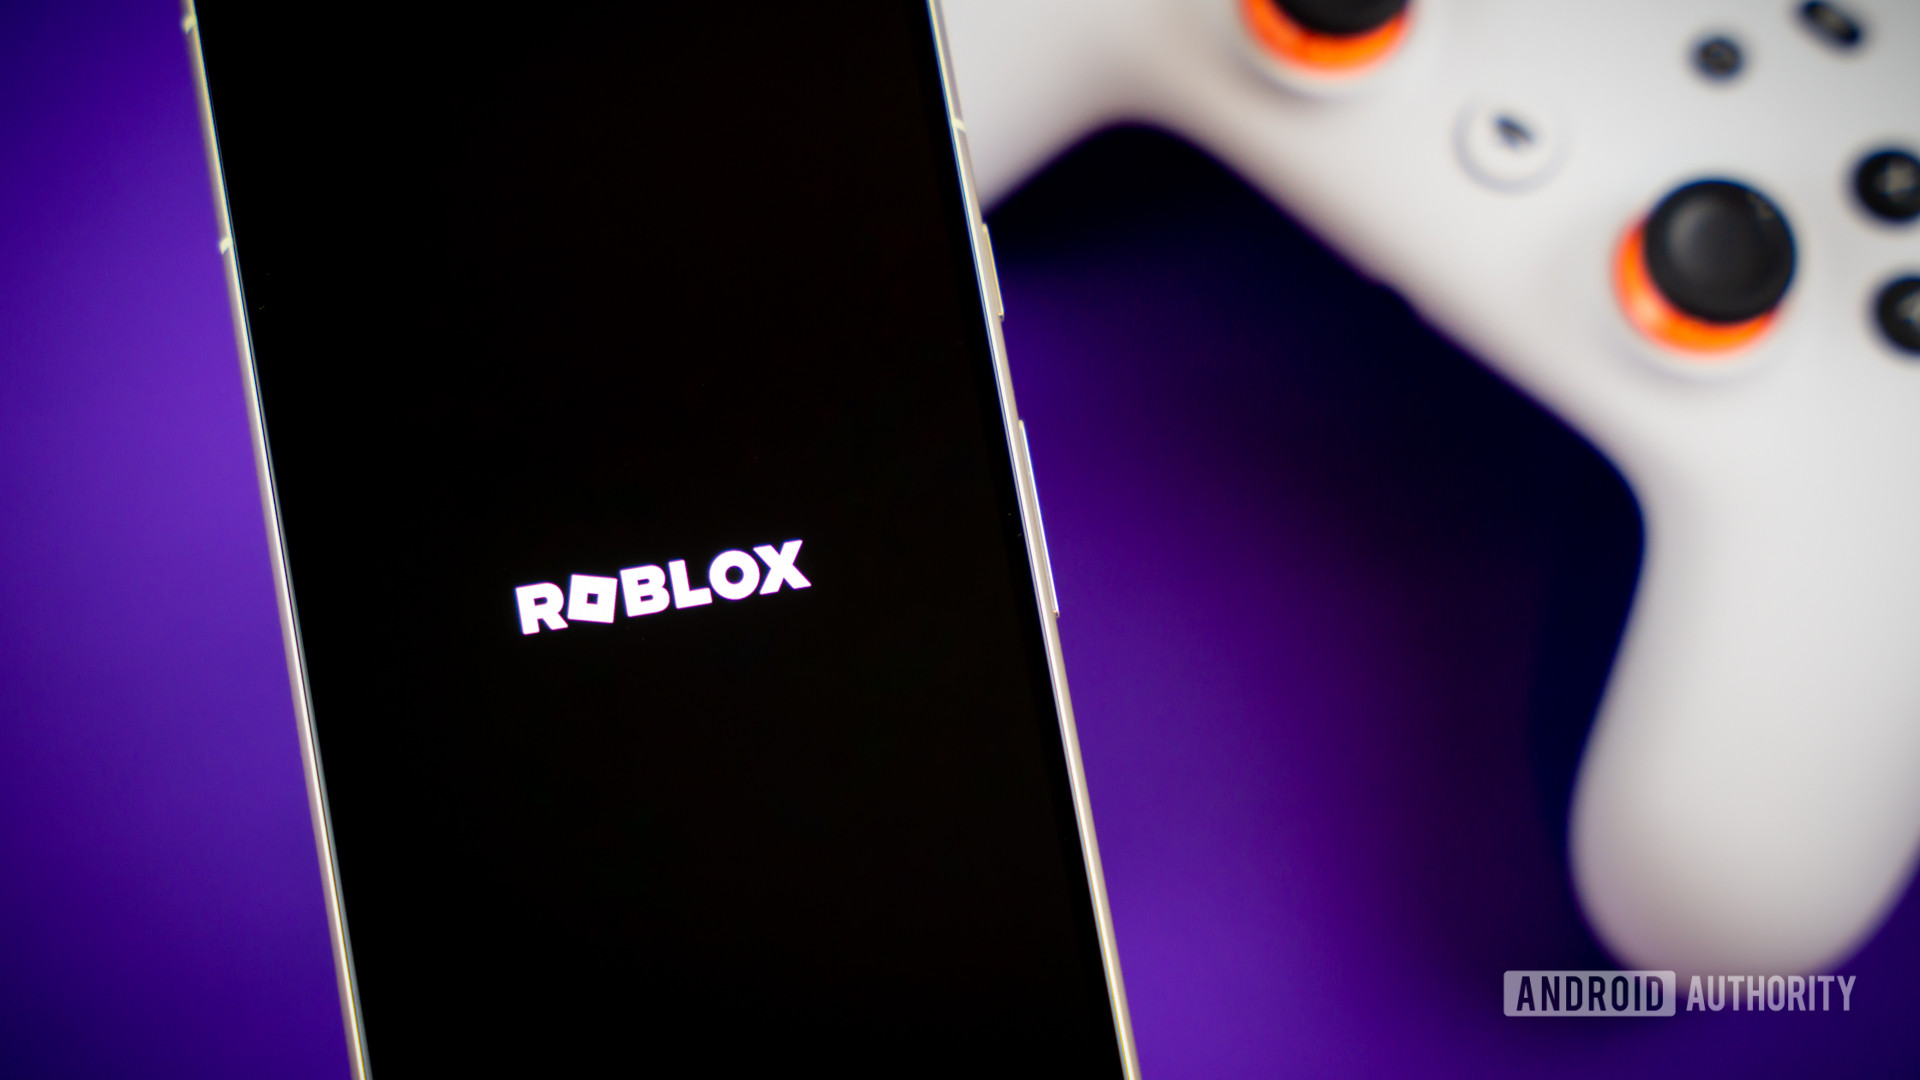 Roblox game logo on smartphone next to controller Stock photo 1